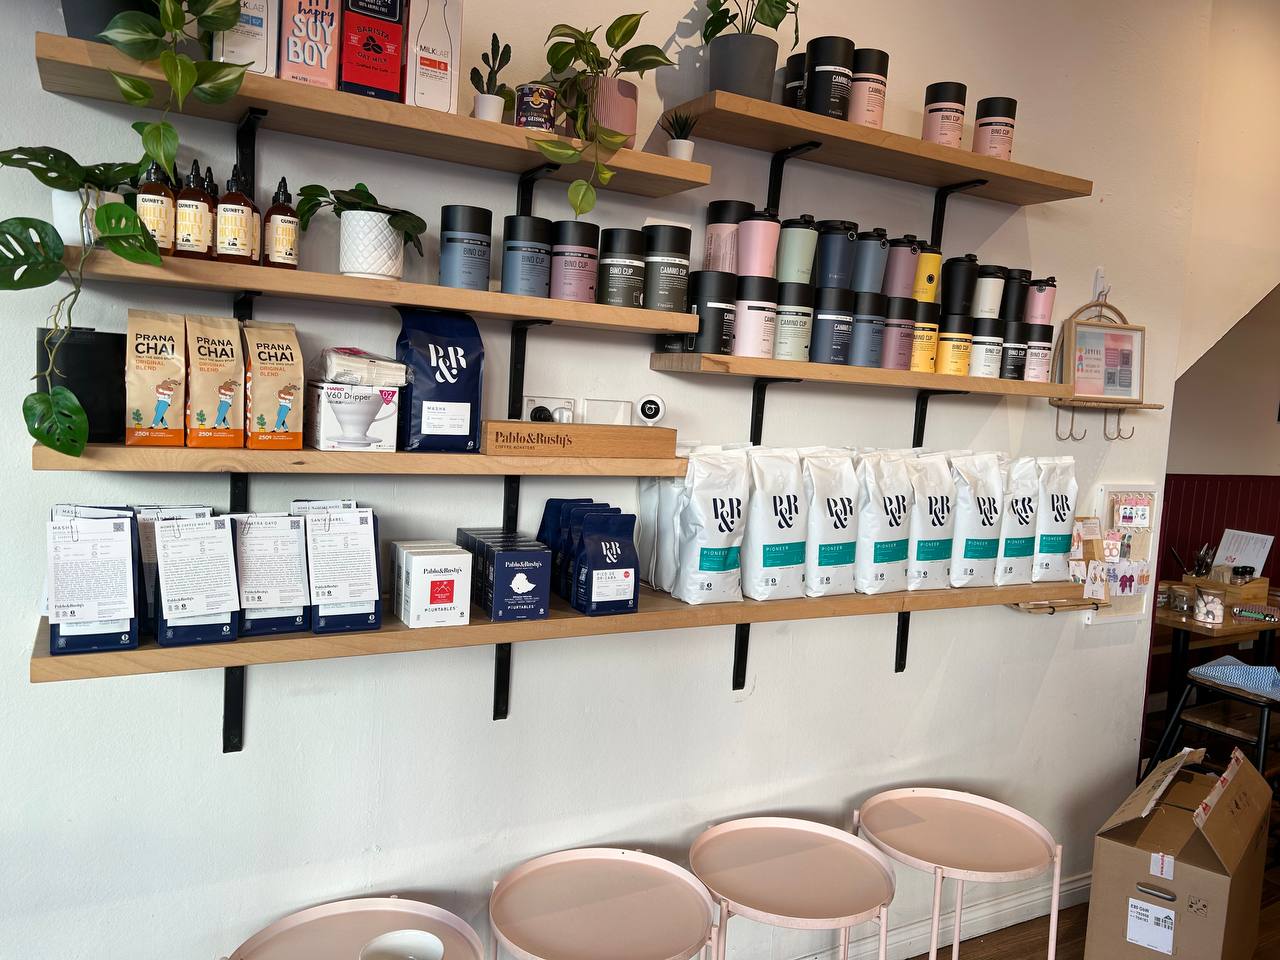 Picture shows a full and vibrant looking retail display shelf at Pure Brew Cafe in Gordon SYD, Australia